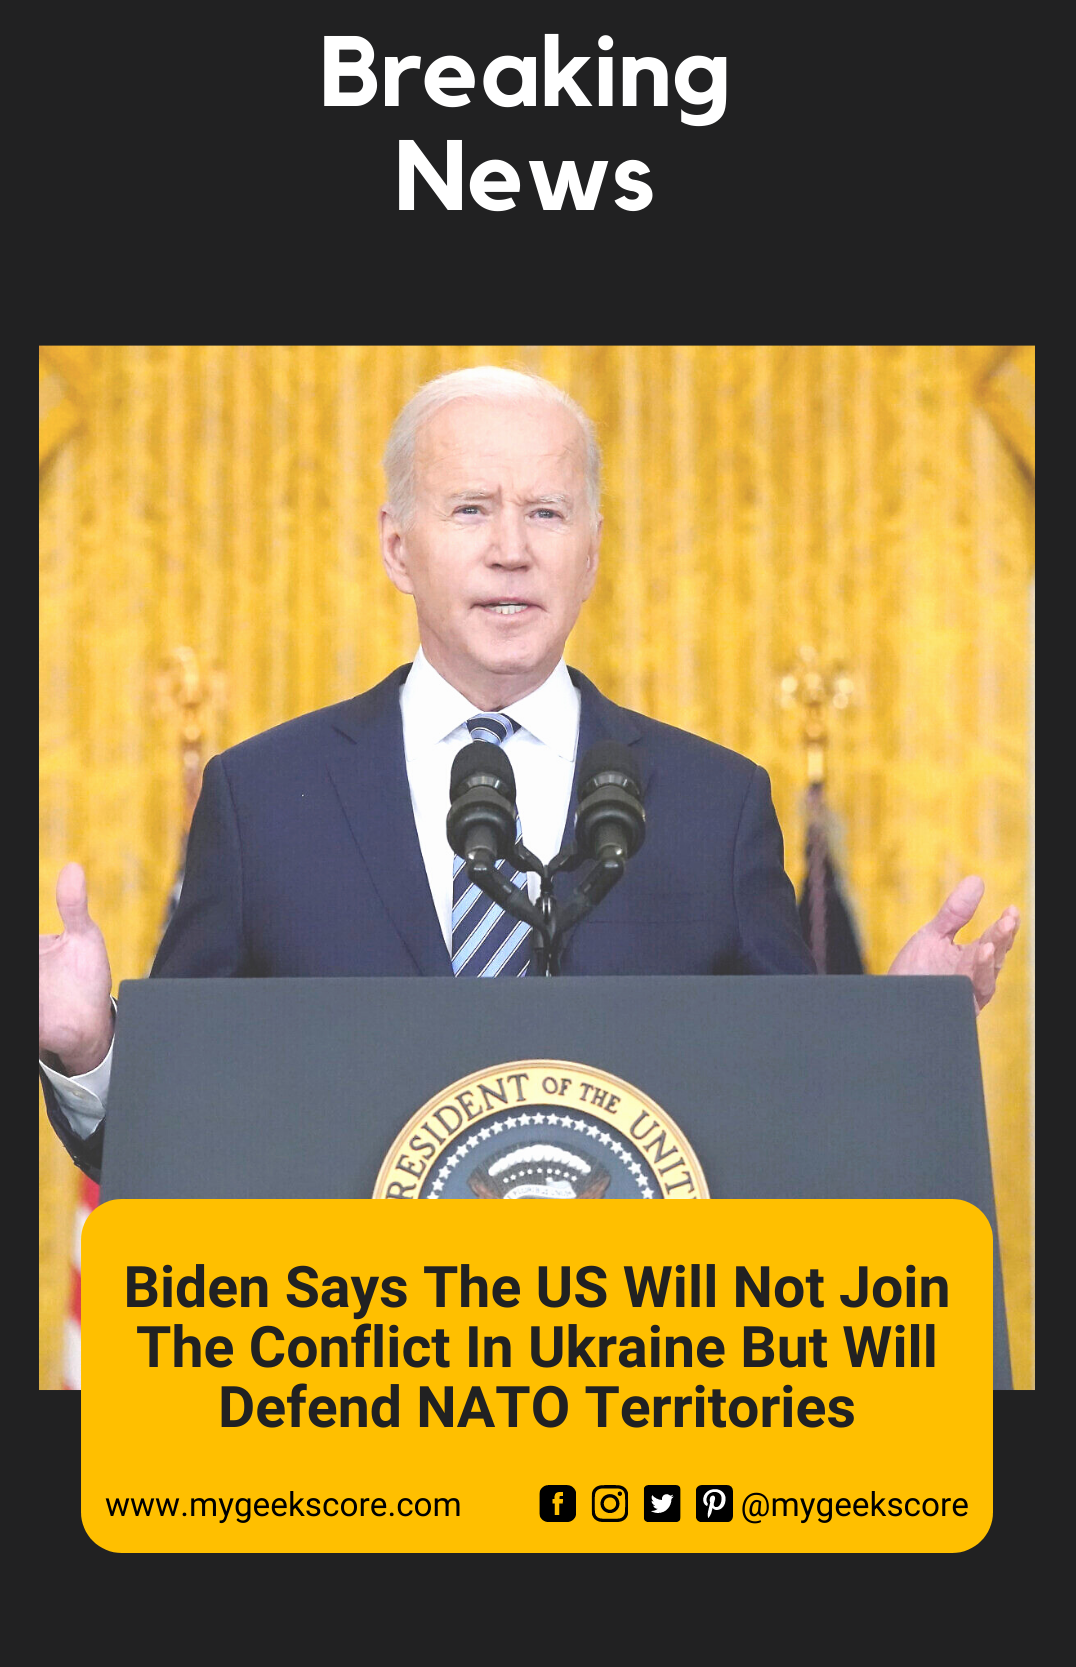 Biden says the US will not join the conflict in Ukraine but will defend NATO territories - My Geek Score